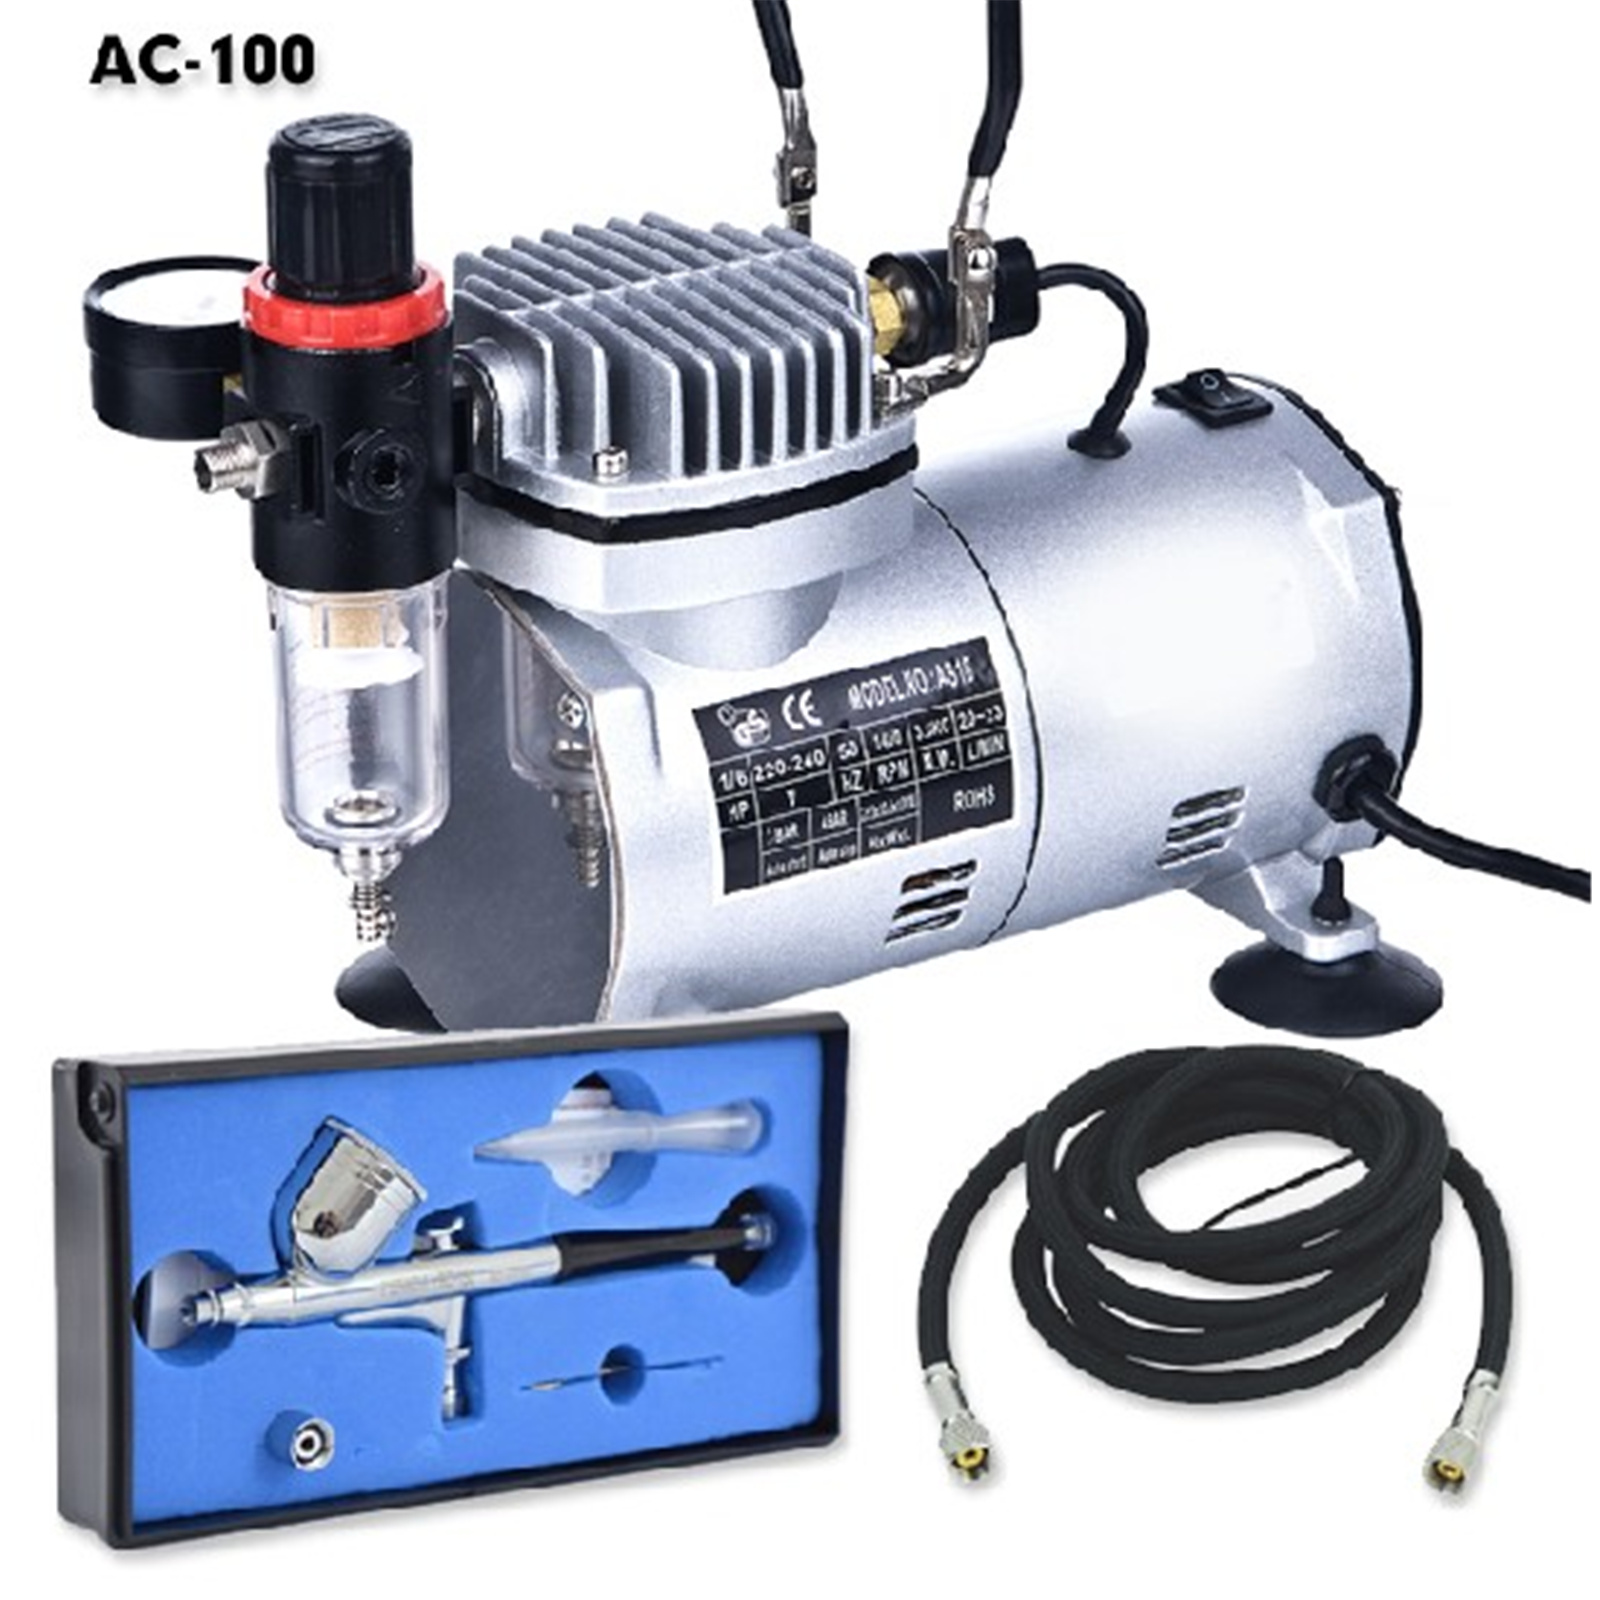 Buy the Fengda TBL - AC-100 Standard Mini Compressor with Gravity Fed  Airbrush ( TBL - AC-100 ) online - PBTech.com